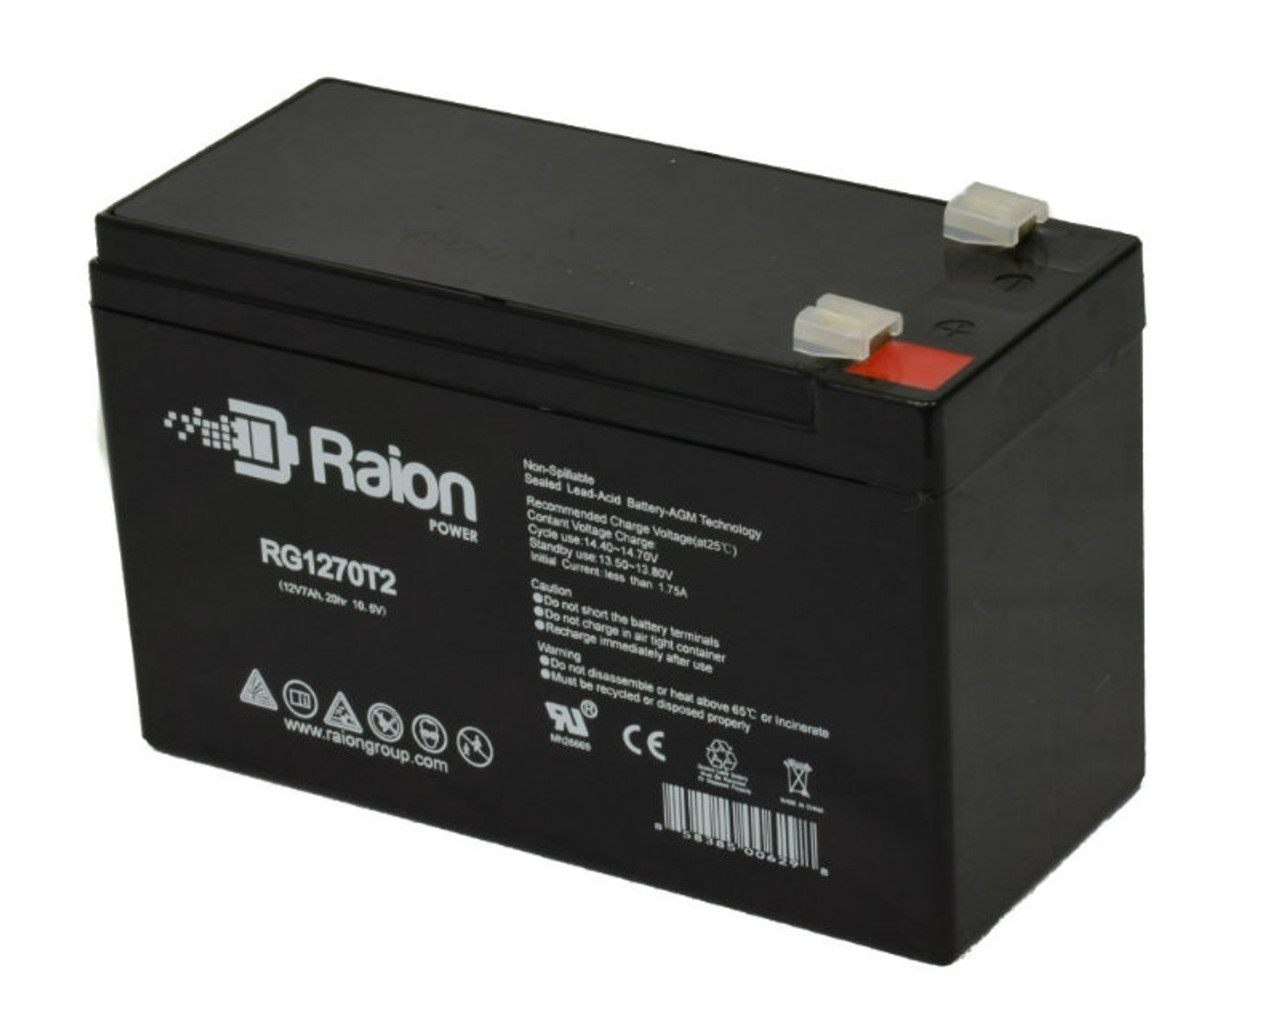 Raion Power RG1270T1 12V 7Ah Non-Spillable Replacement Battery for Zeus Battery PC7.6-12-F1